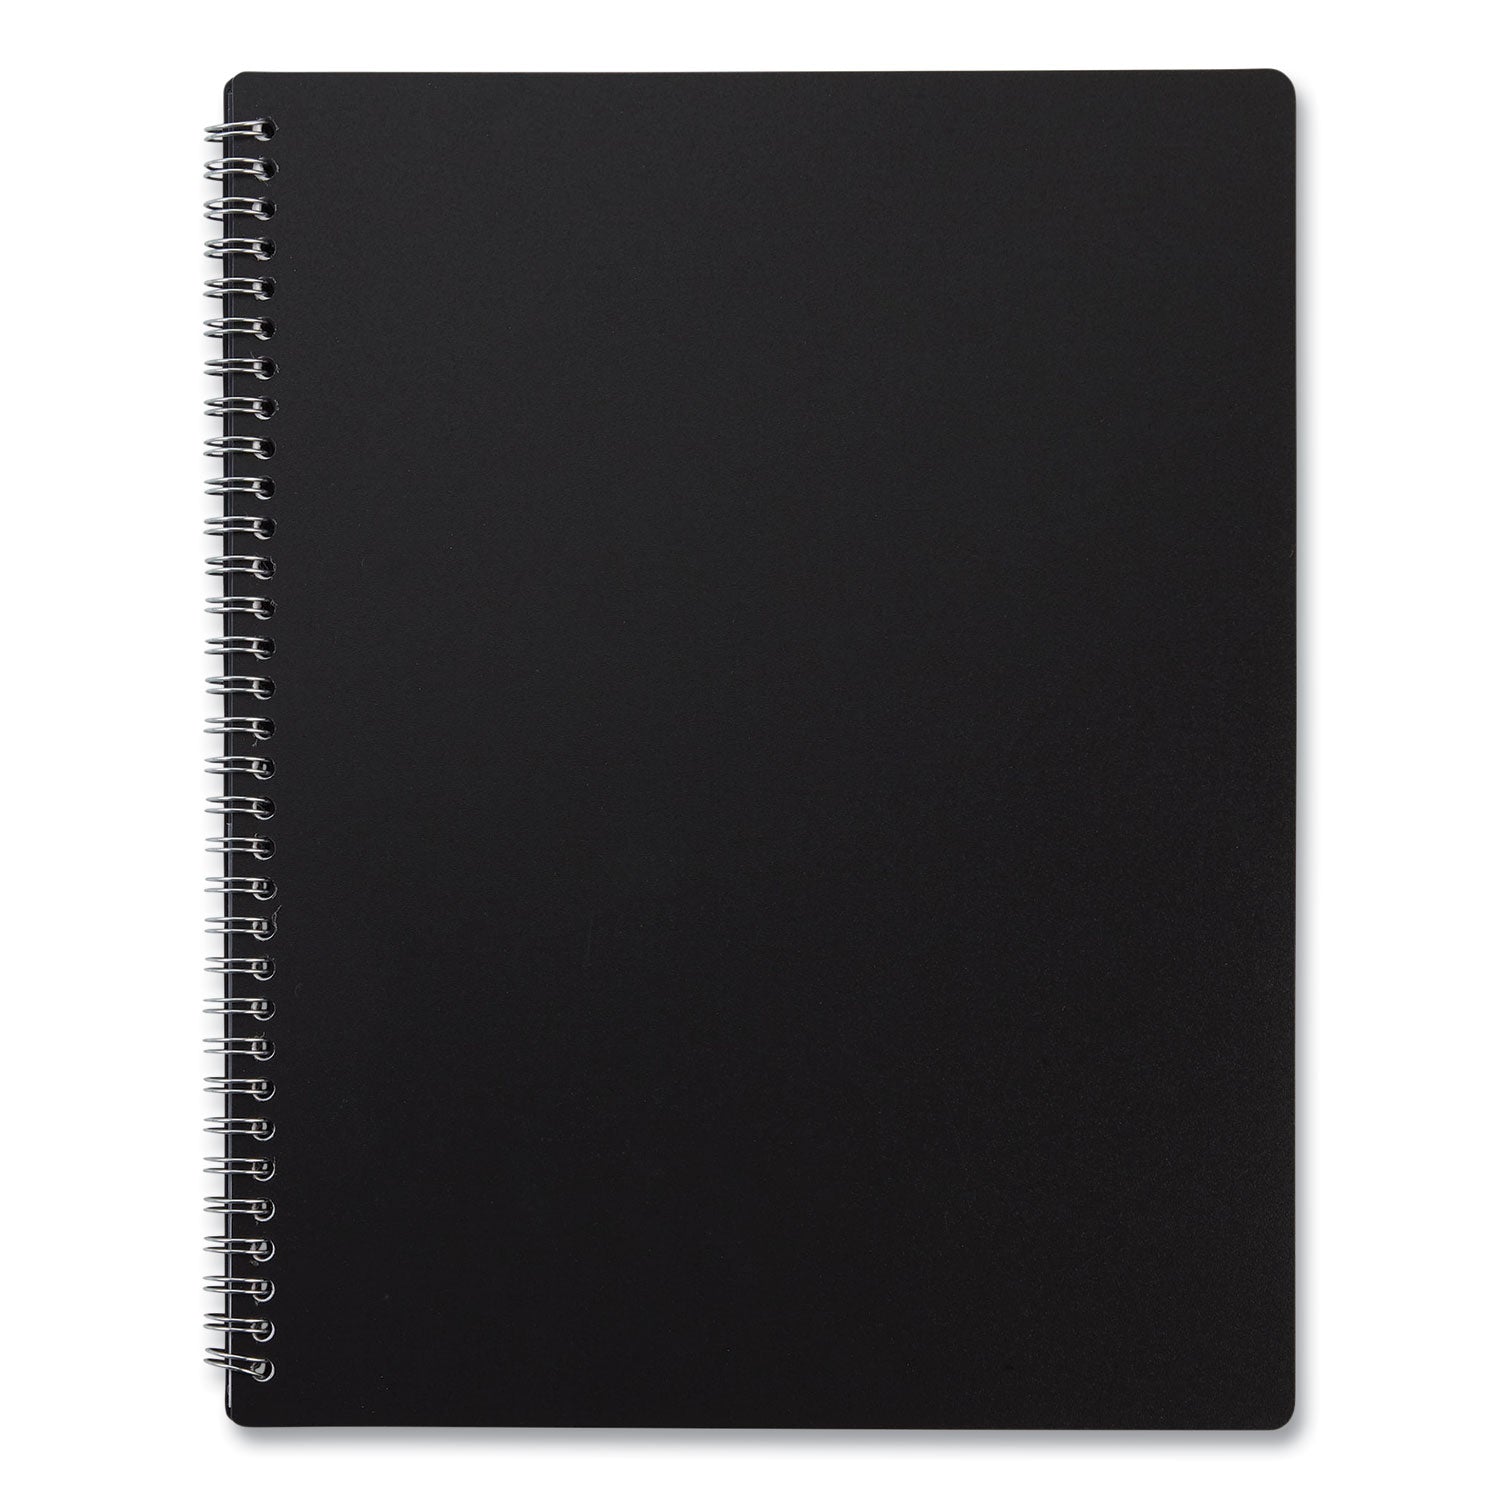 weekly-teacher-planner-two-page-spread-nine-classes-11-x-85-black-cover_tud5949821 - 2